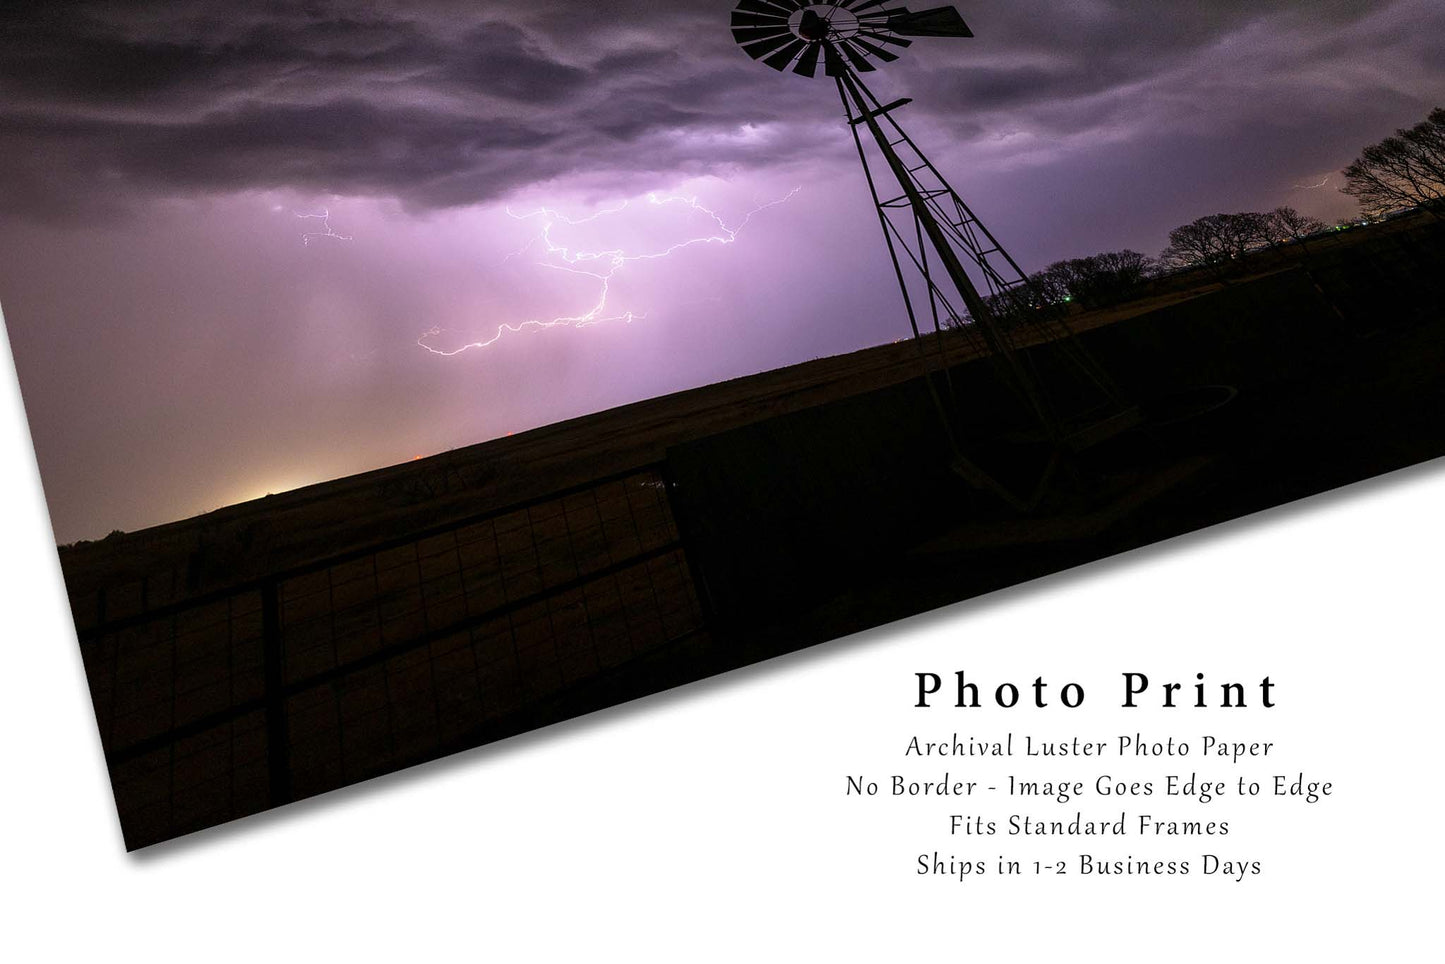 Storm Photography Print | Old Windmill and Lightning Picture | Oklahoma Wall Art | Thunderstorm Photo | Farmhouse Decor | Not Framed